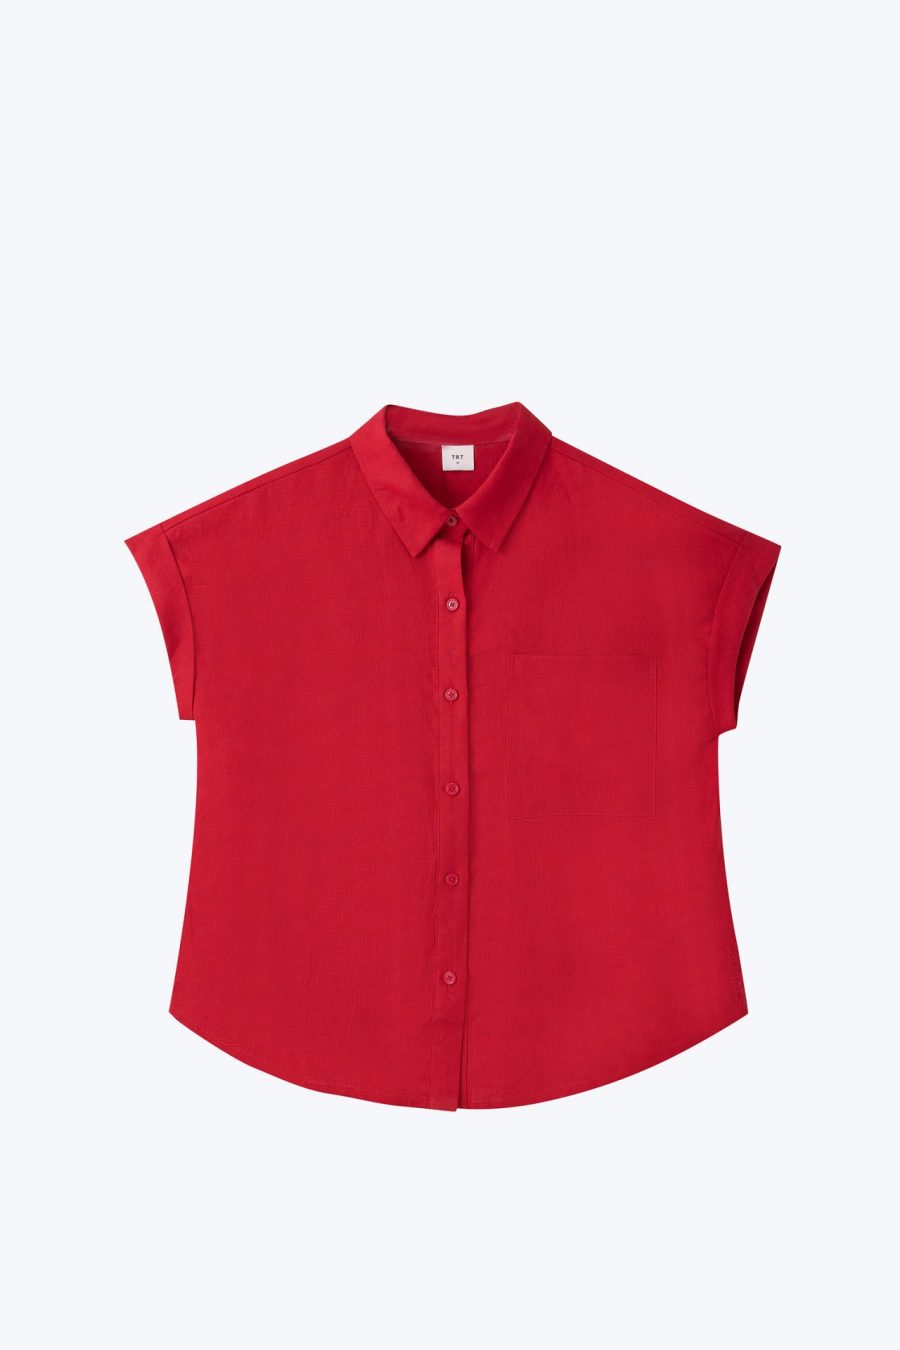 CB001068H TOP RED